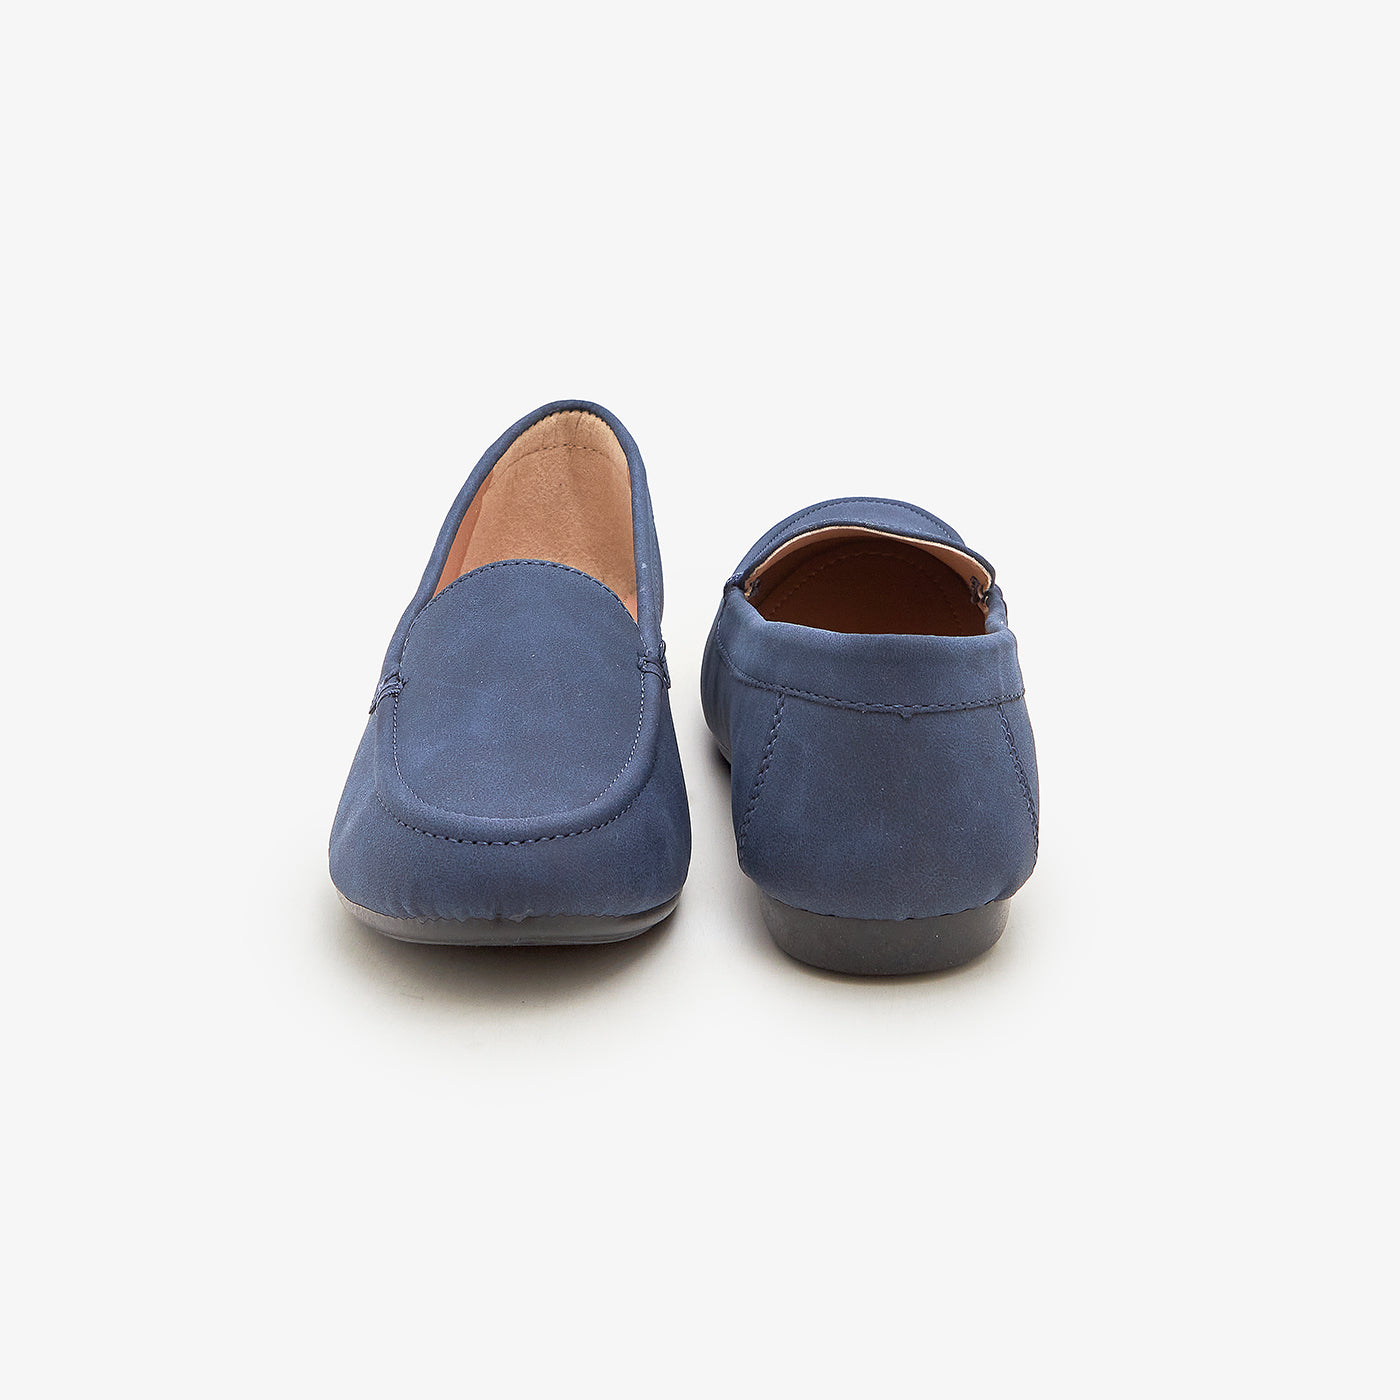 Plain Loafers for Women